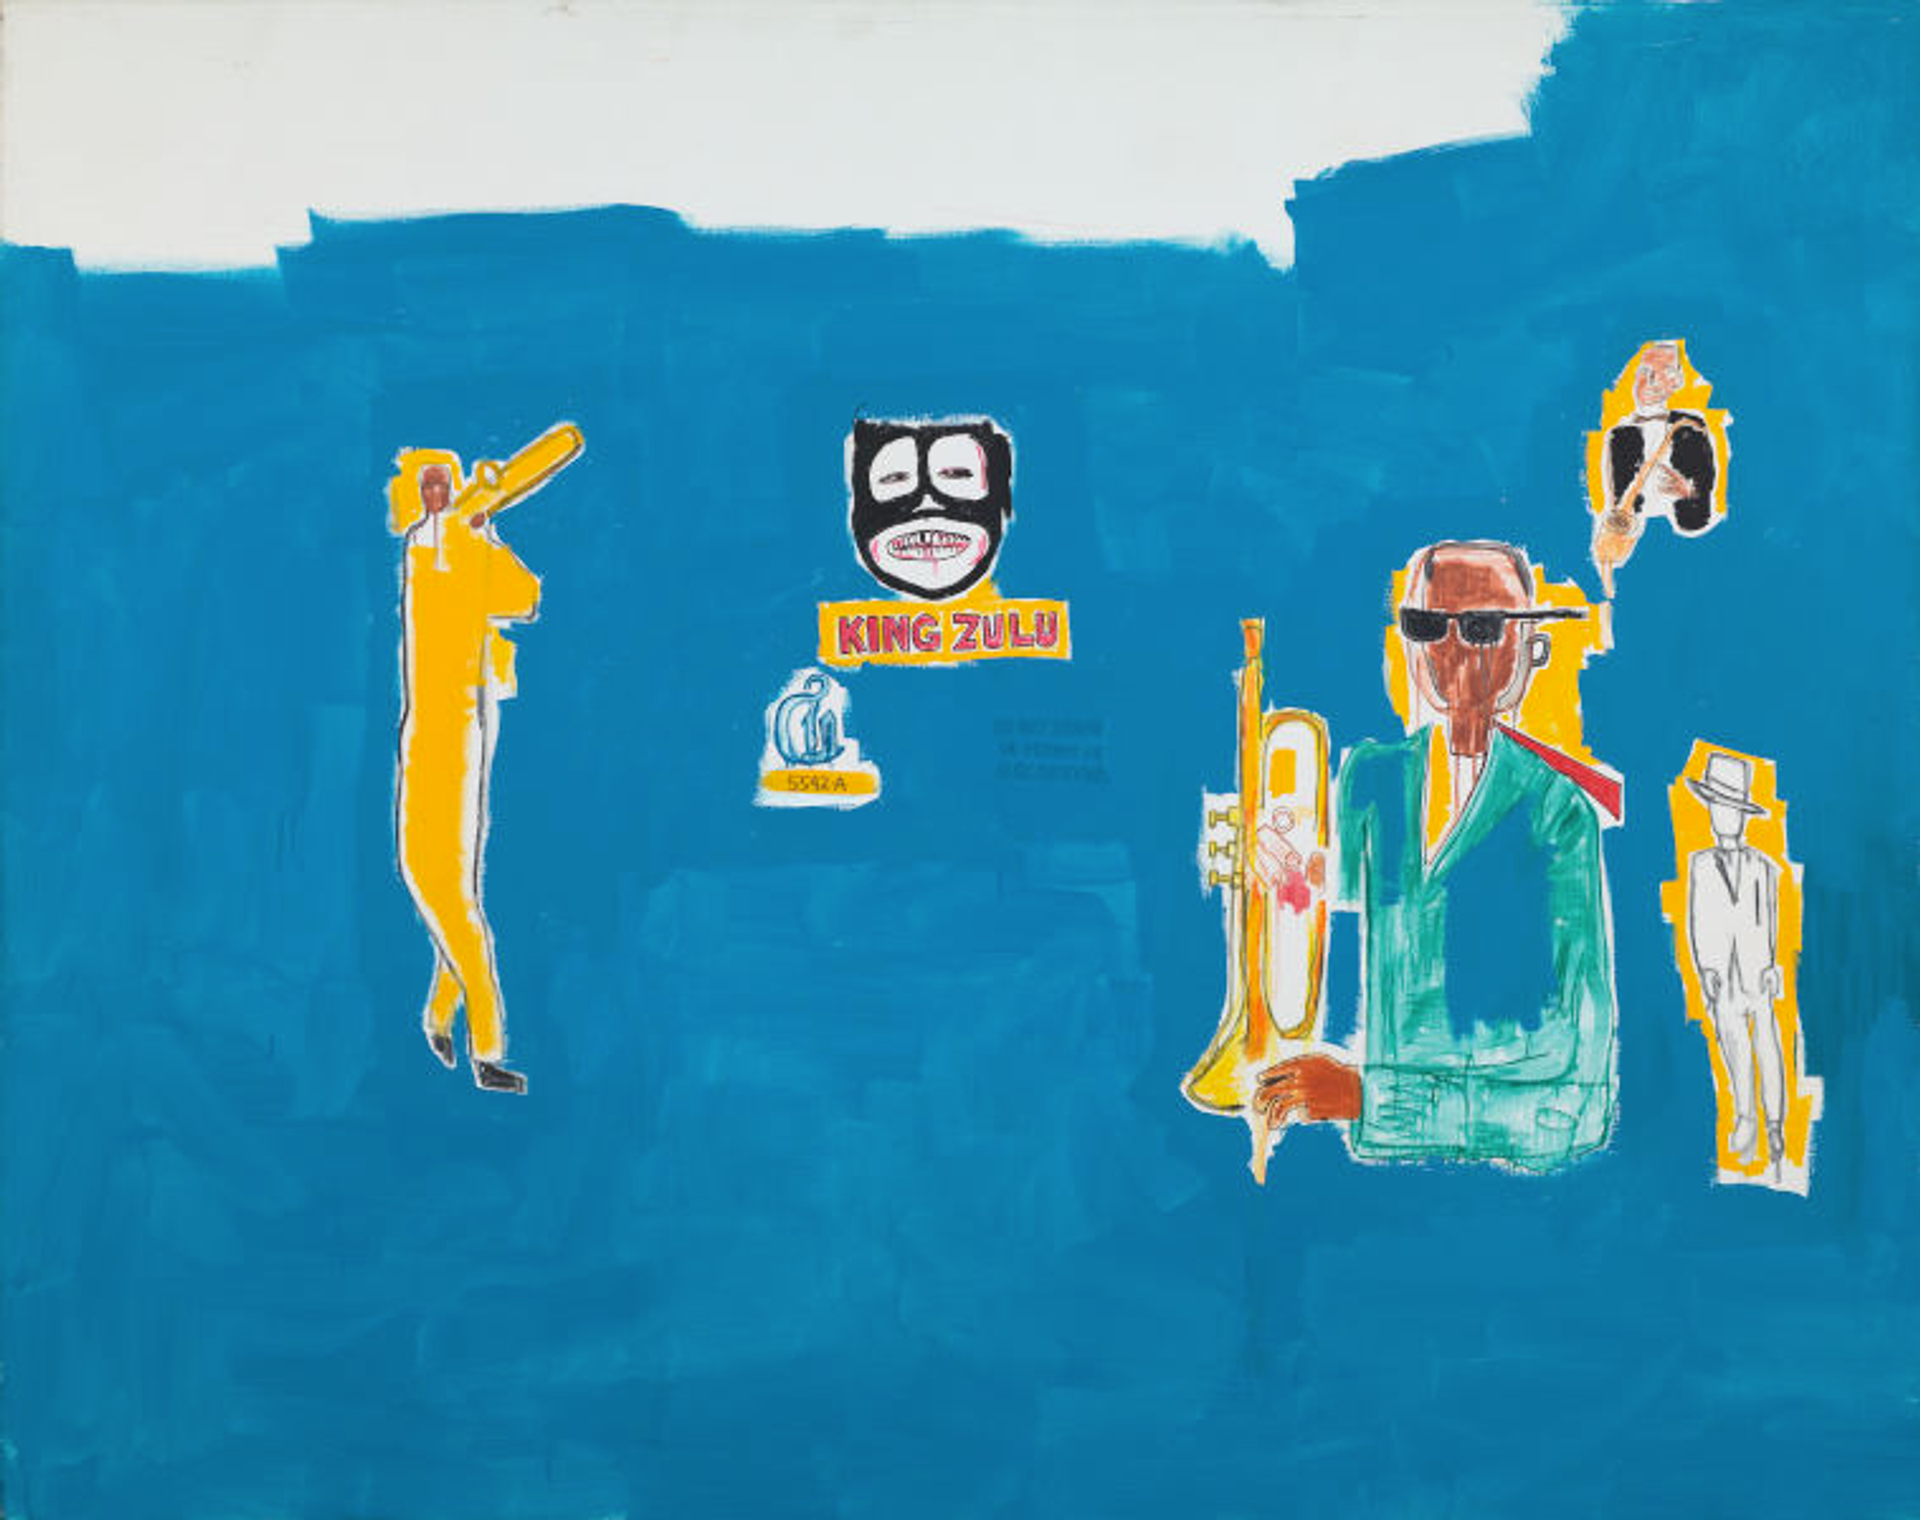 Jean-Michel Basquiat’s King Zulu. Neo-expressionist figures of men playing or holding jazz instruments against a blue background.